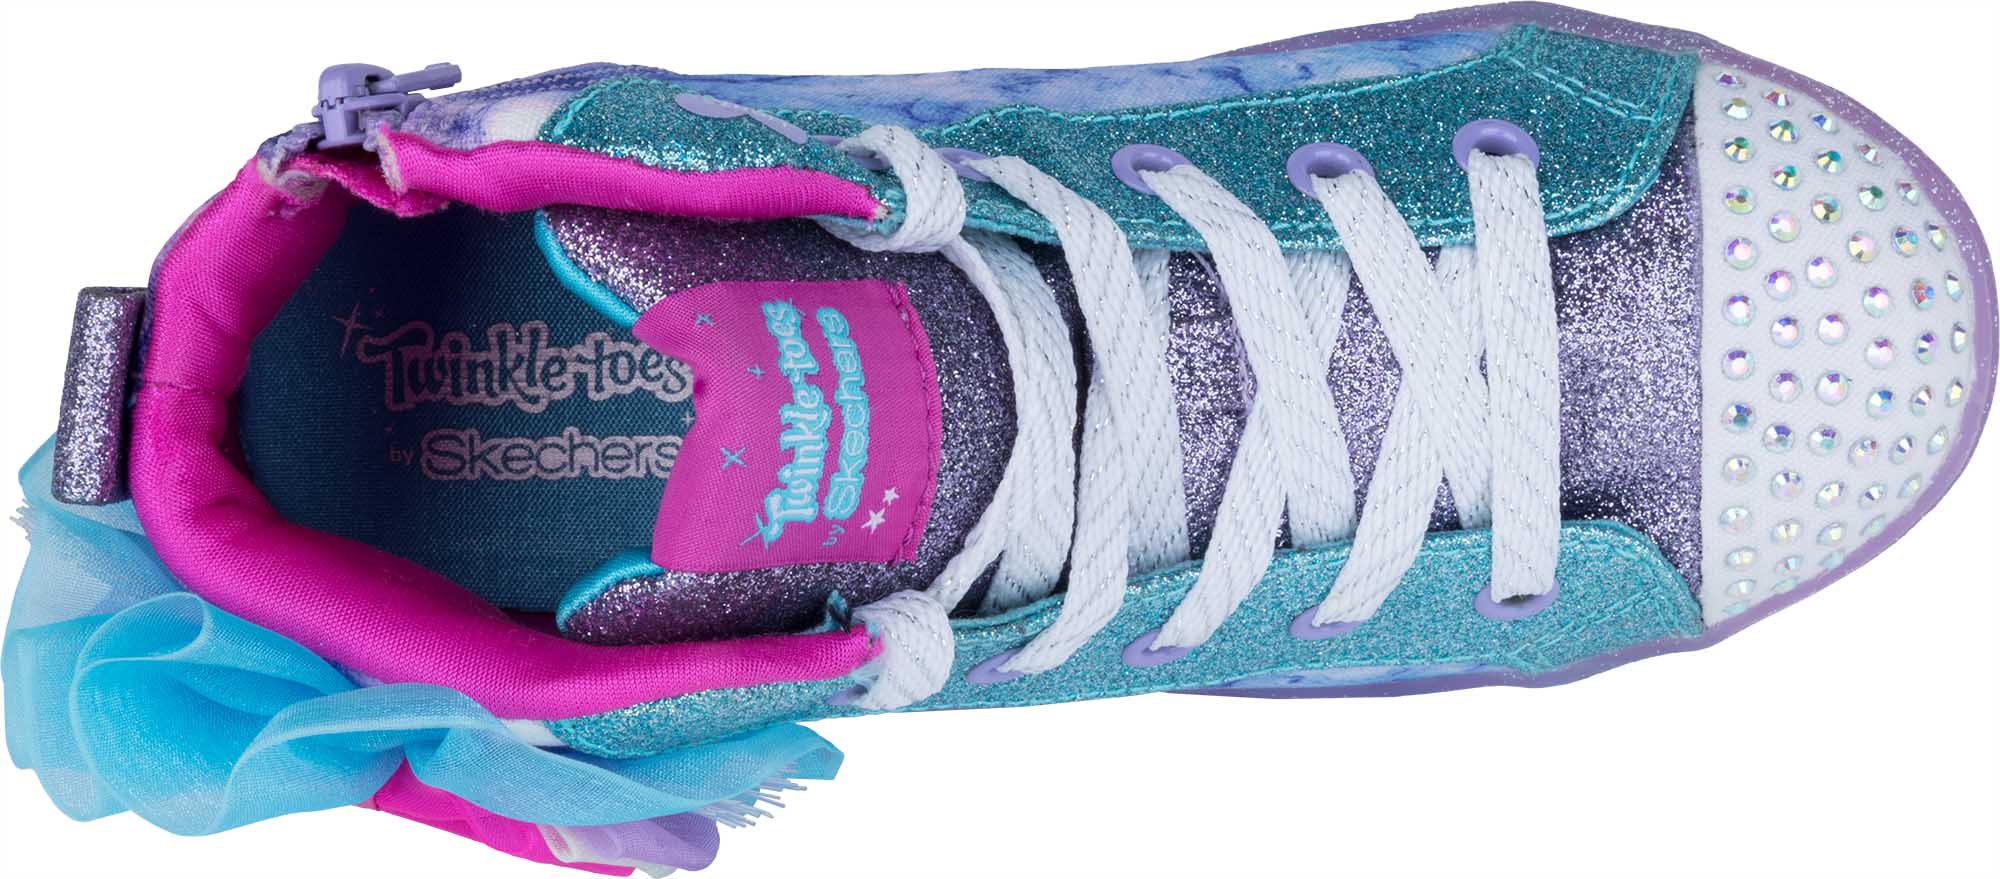 skechers shoes for girls 2016